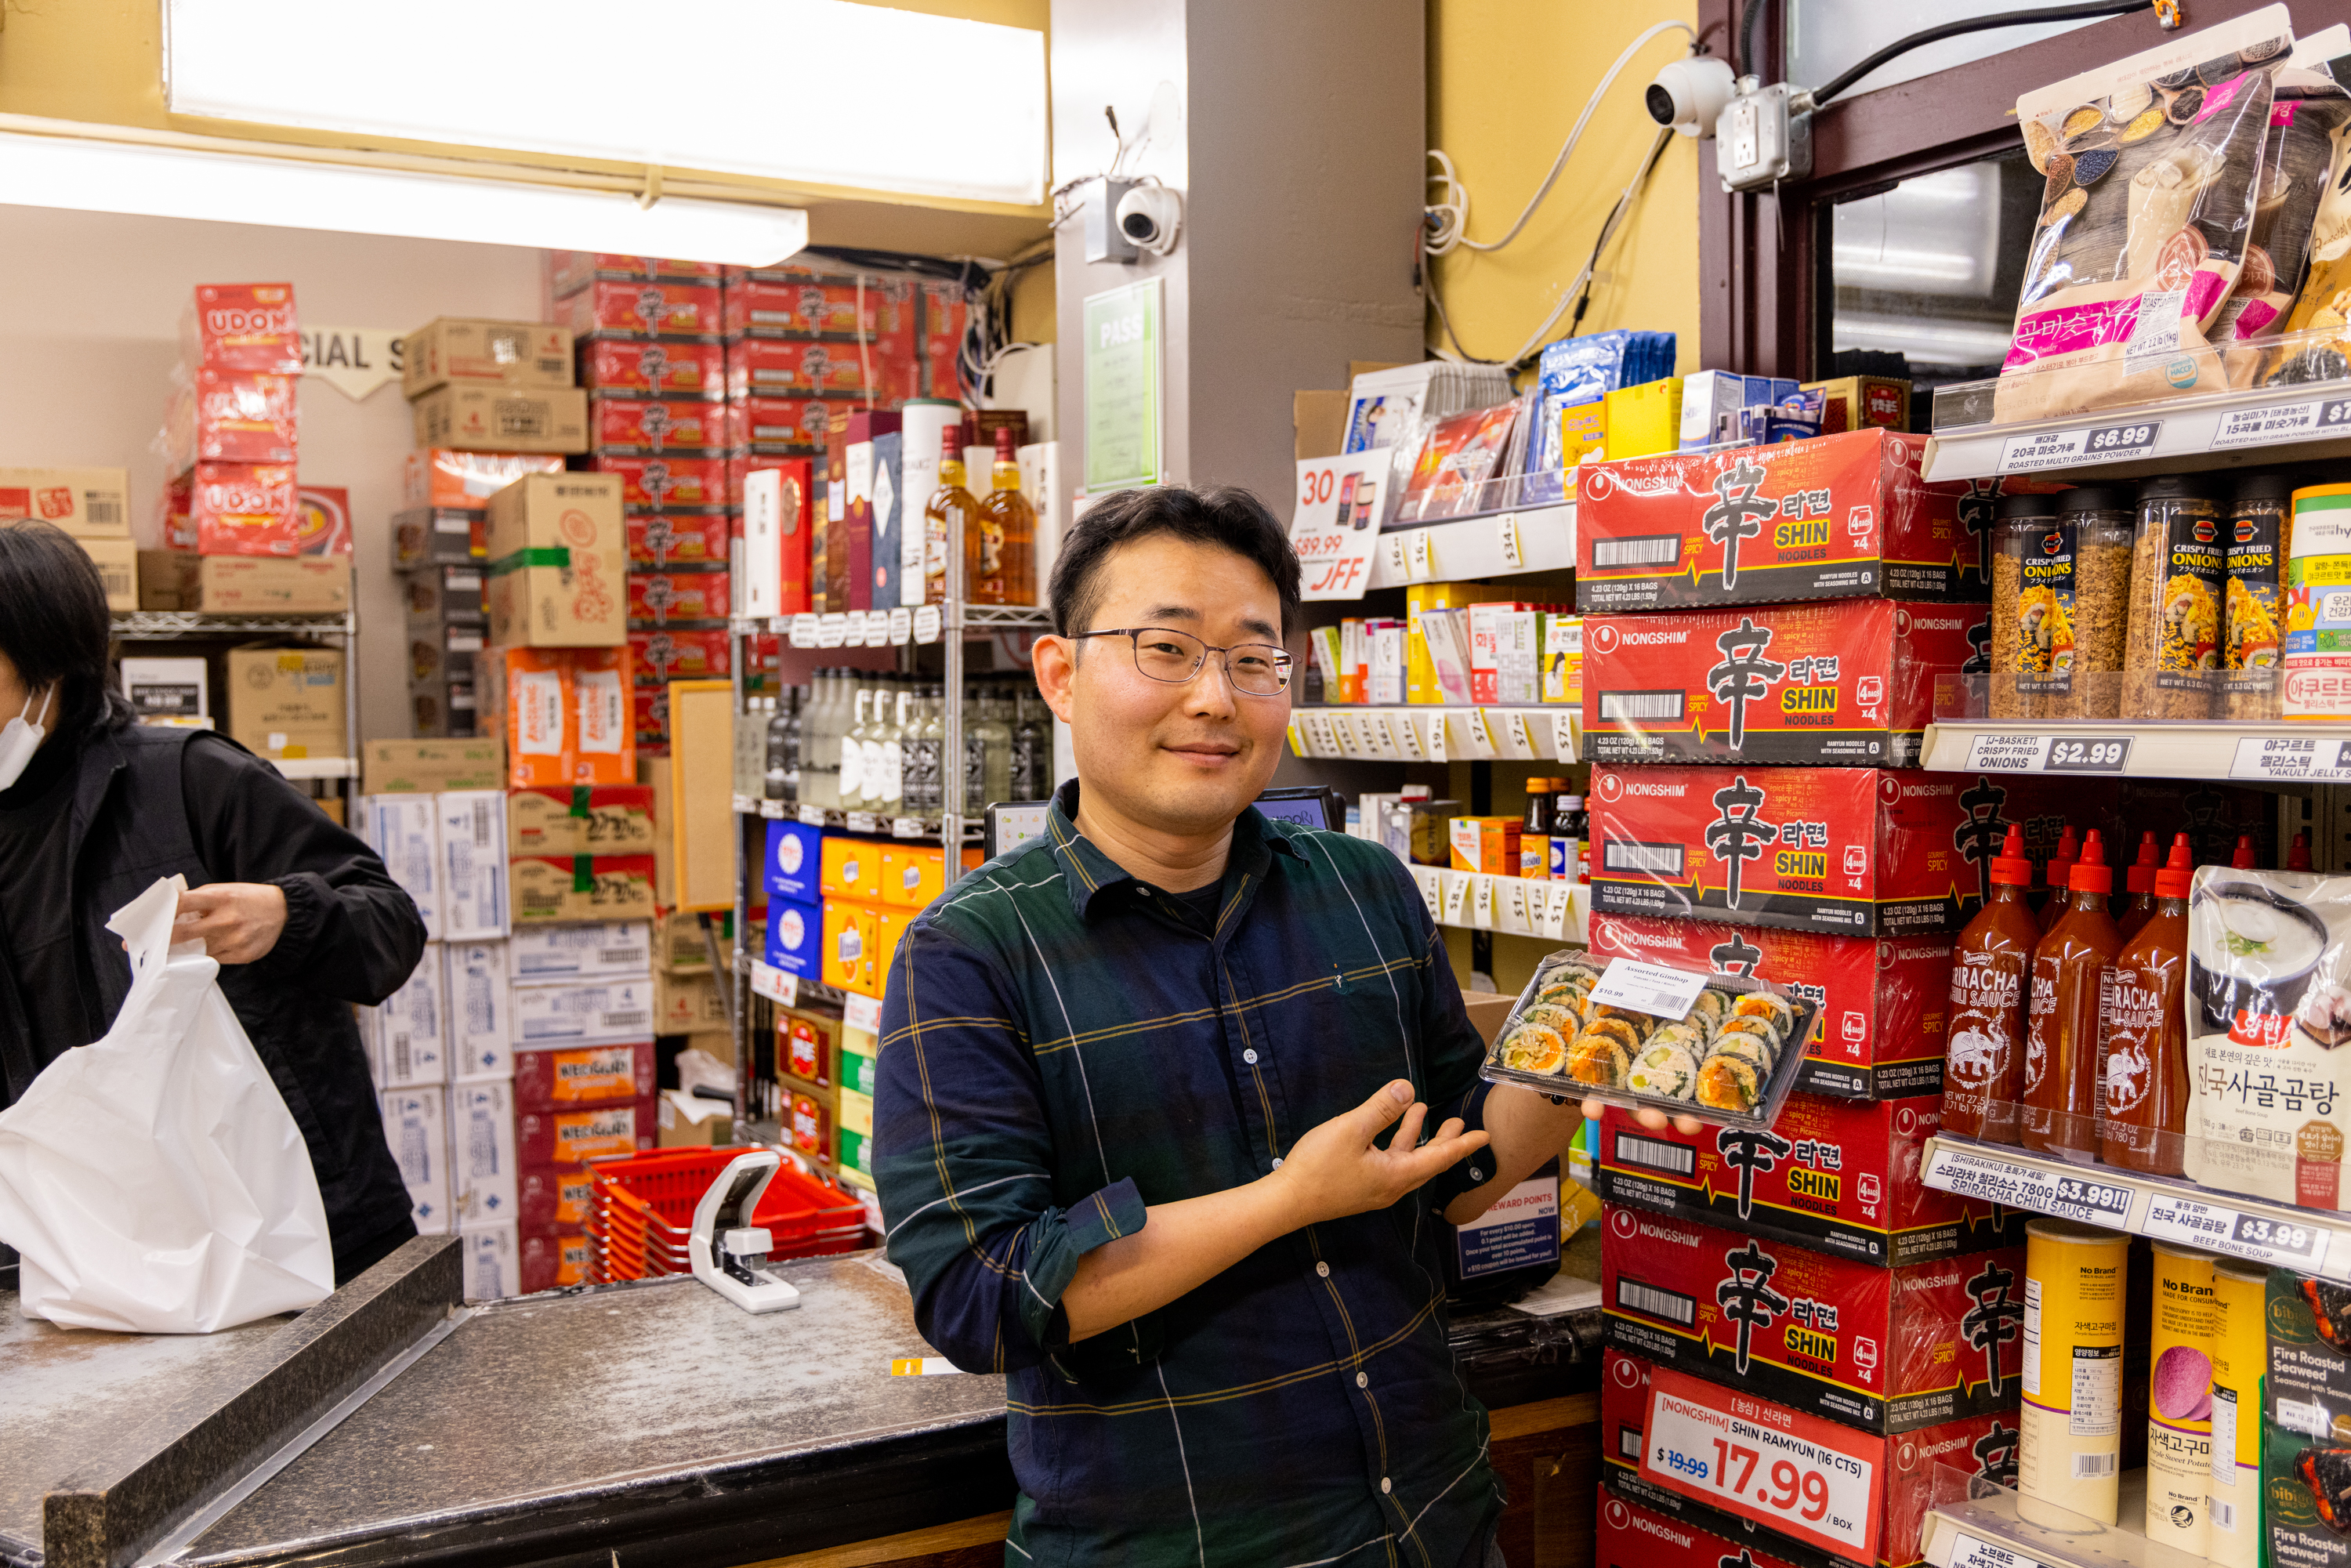 A person in a store smiles while holding a tray of sushi. They stand by shelves stocked with Shin Ramyun noodles, hot sauces, and various groceries. Another person is at the counter.